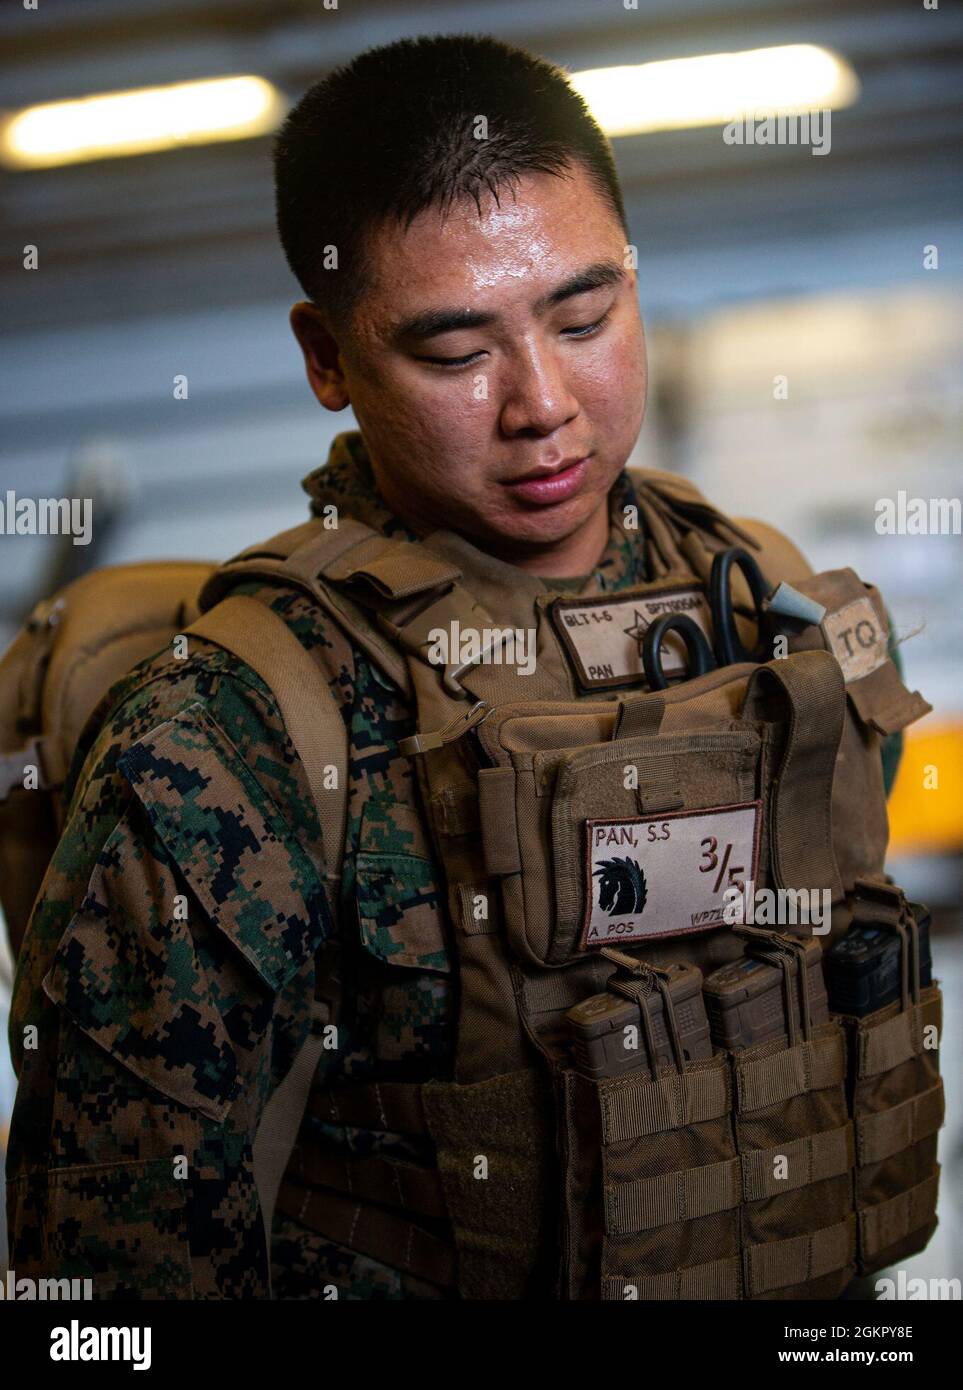 A U.S. Navy Seaman Stanley Pan, with Battalion Landing Team 3/5, 31st  Marine Expeditionary Unit (MEU), poses for a photo after conducting a live  demonstration of a fresh old blood transfusion aboard